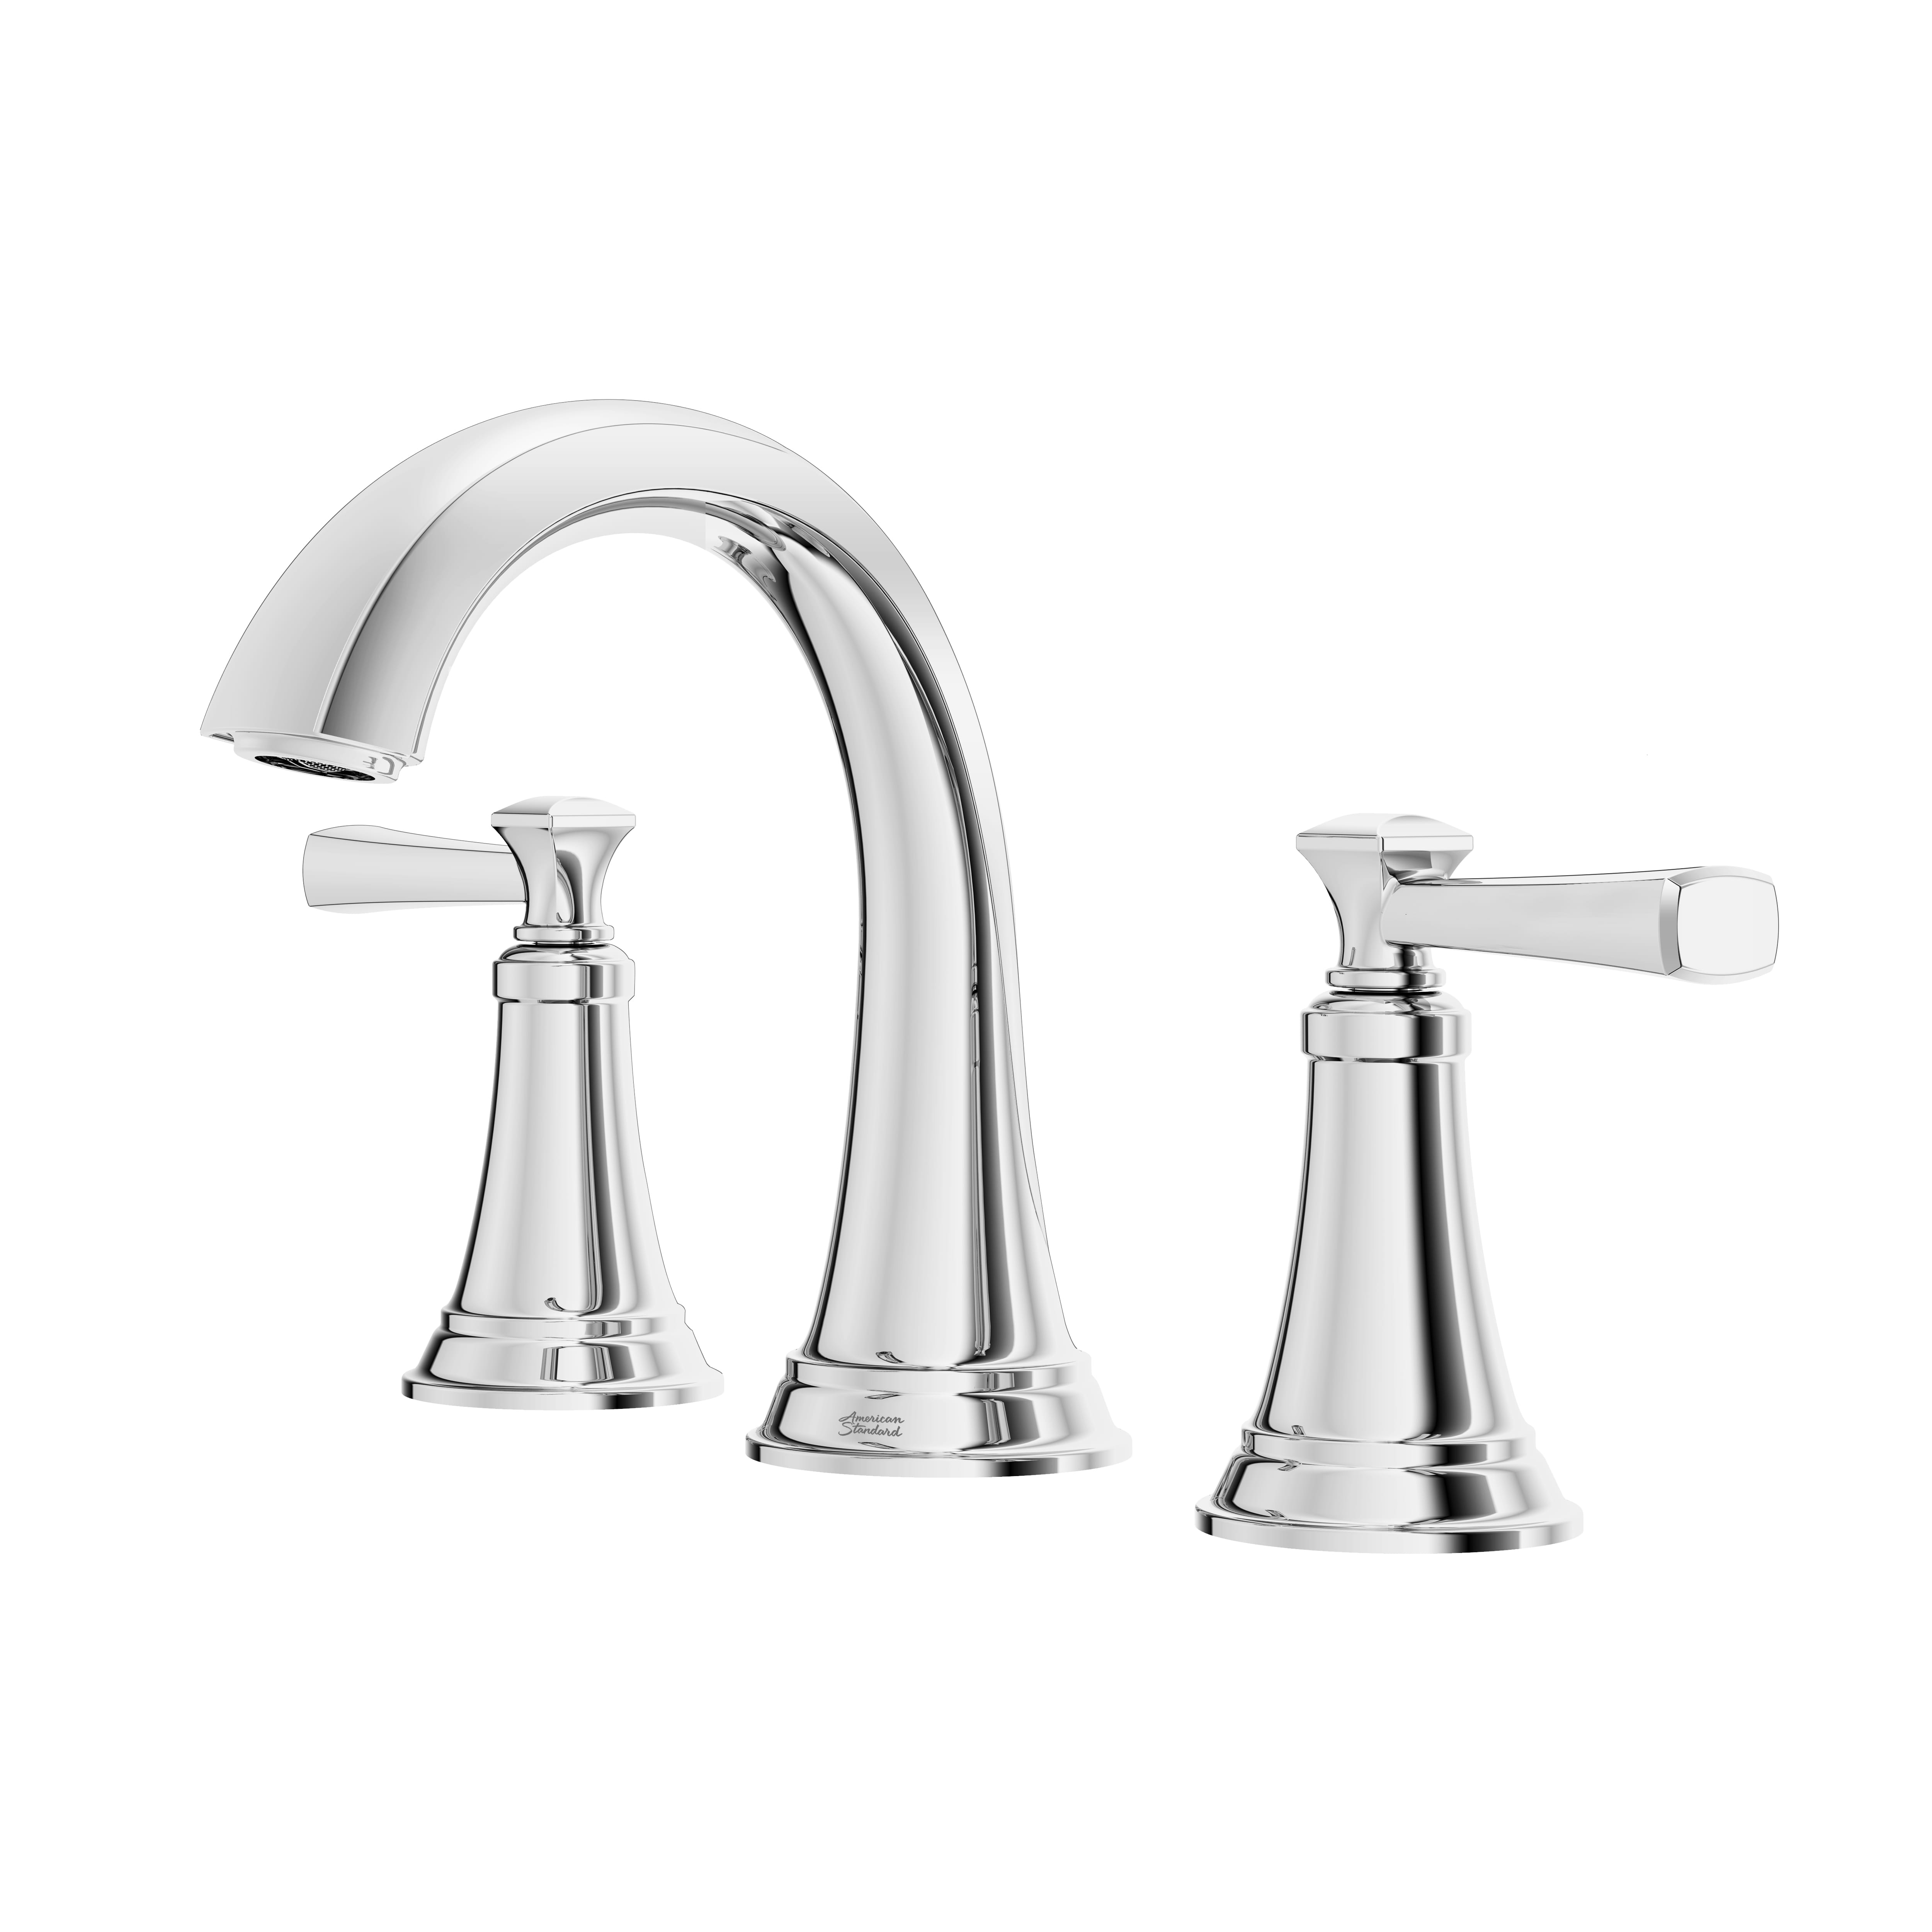 Rumson 8 In Widespread 2 Handle Bathroom Faucet 12 GPM with Lever Handles POLISHED CHROME